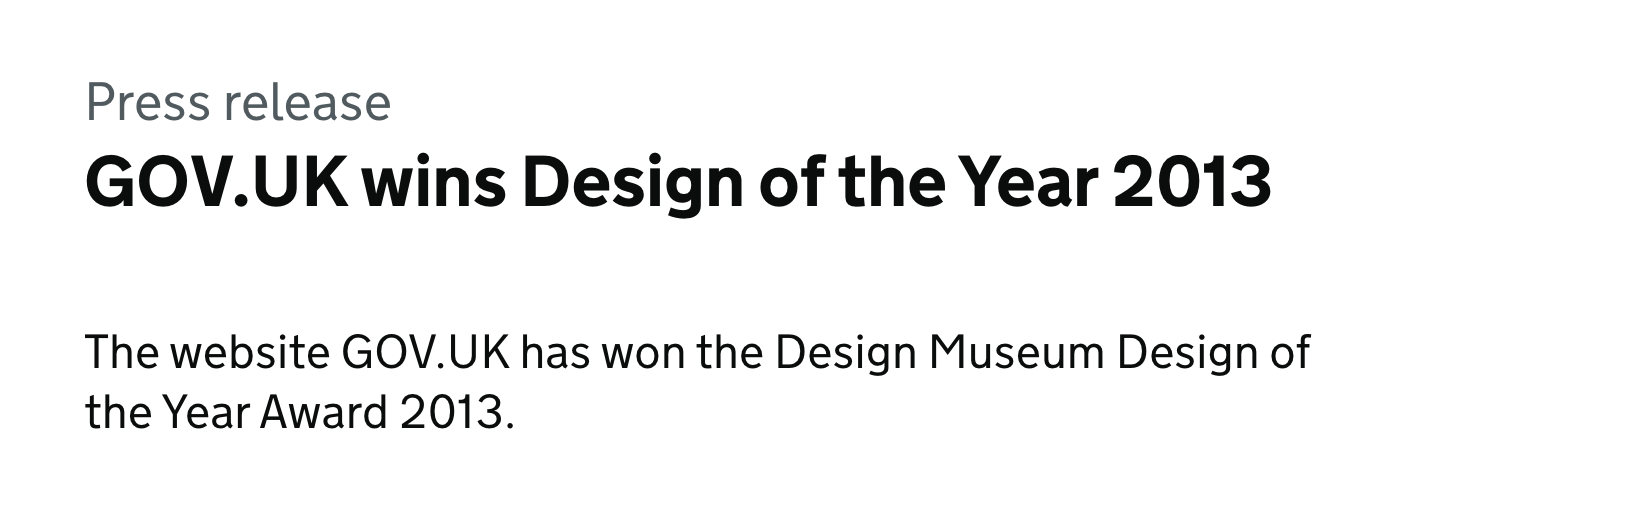 Screenshot of the press release where GOV.UK won Design of the Year 2013